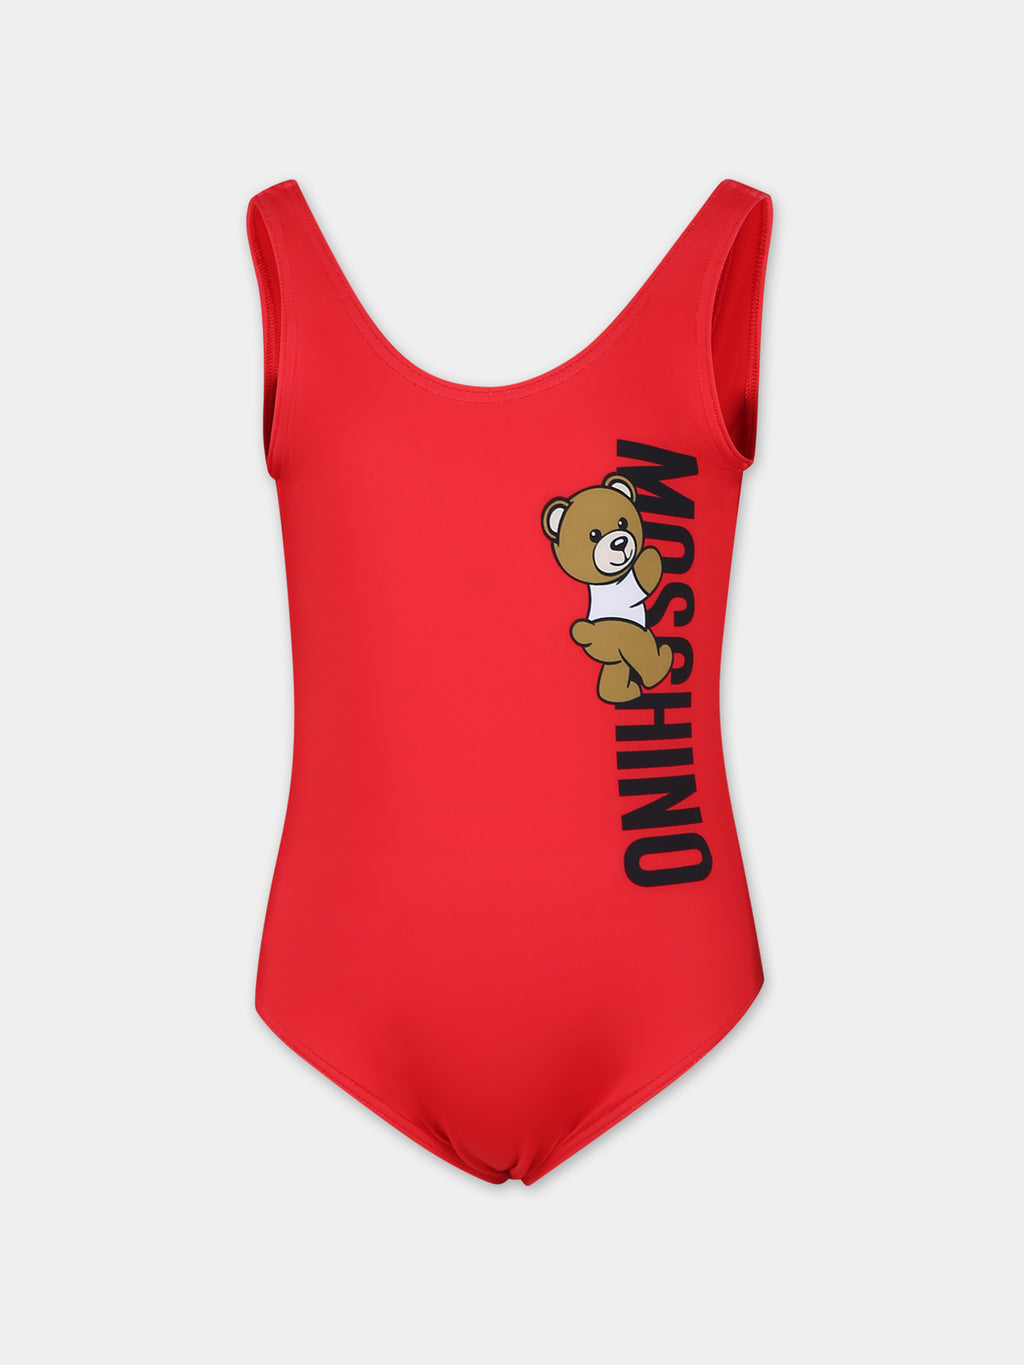 Red swimsuit for girl with Teddy Bear and logo